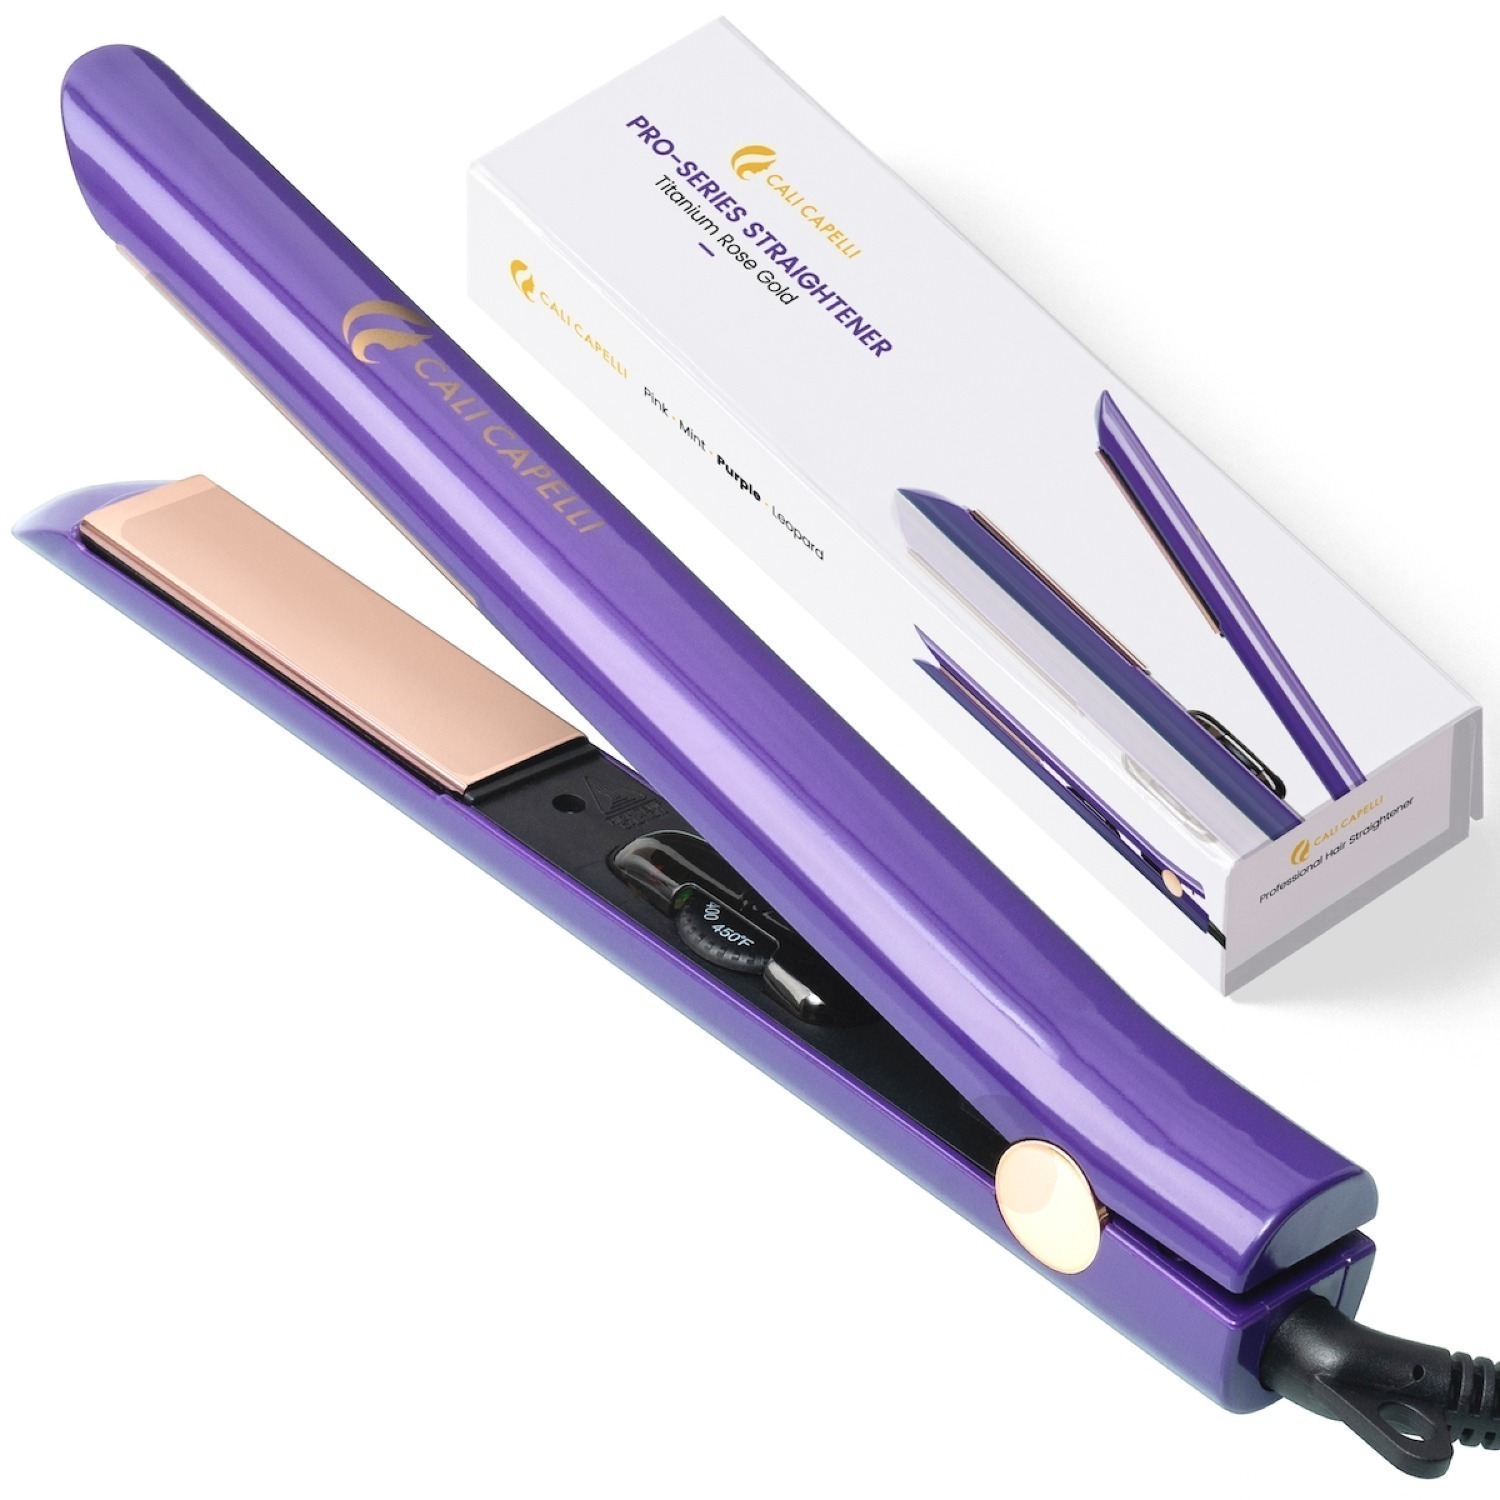 Calicapelli Pro 1'' Negative Ion Infrared Titanium Flat Iron for Hair Styling (Various Colors) $40 & 2-Pack $70 + Free Shipping